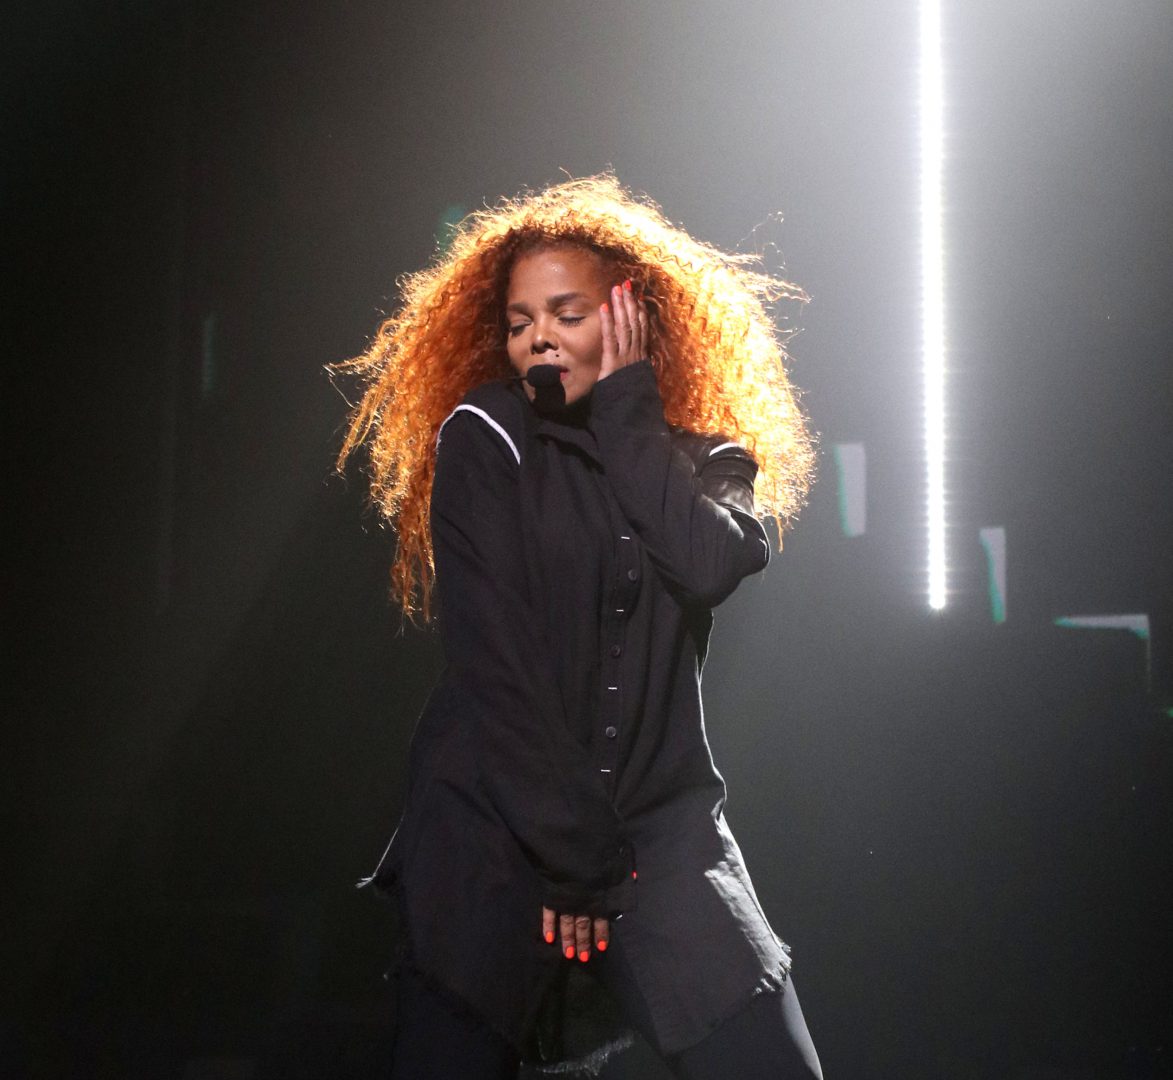 Janet Jackson Metamorphosis at The Las Vegas Residency at Park Theater at Park MGM in Las Vegas, Nevada. (Photo by Farrenton Grigsby)